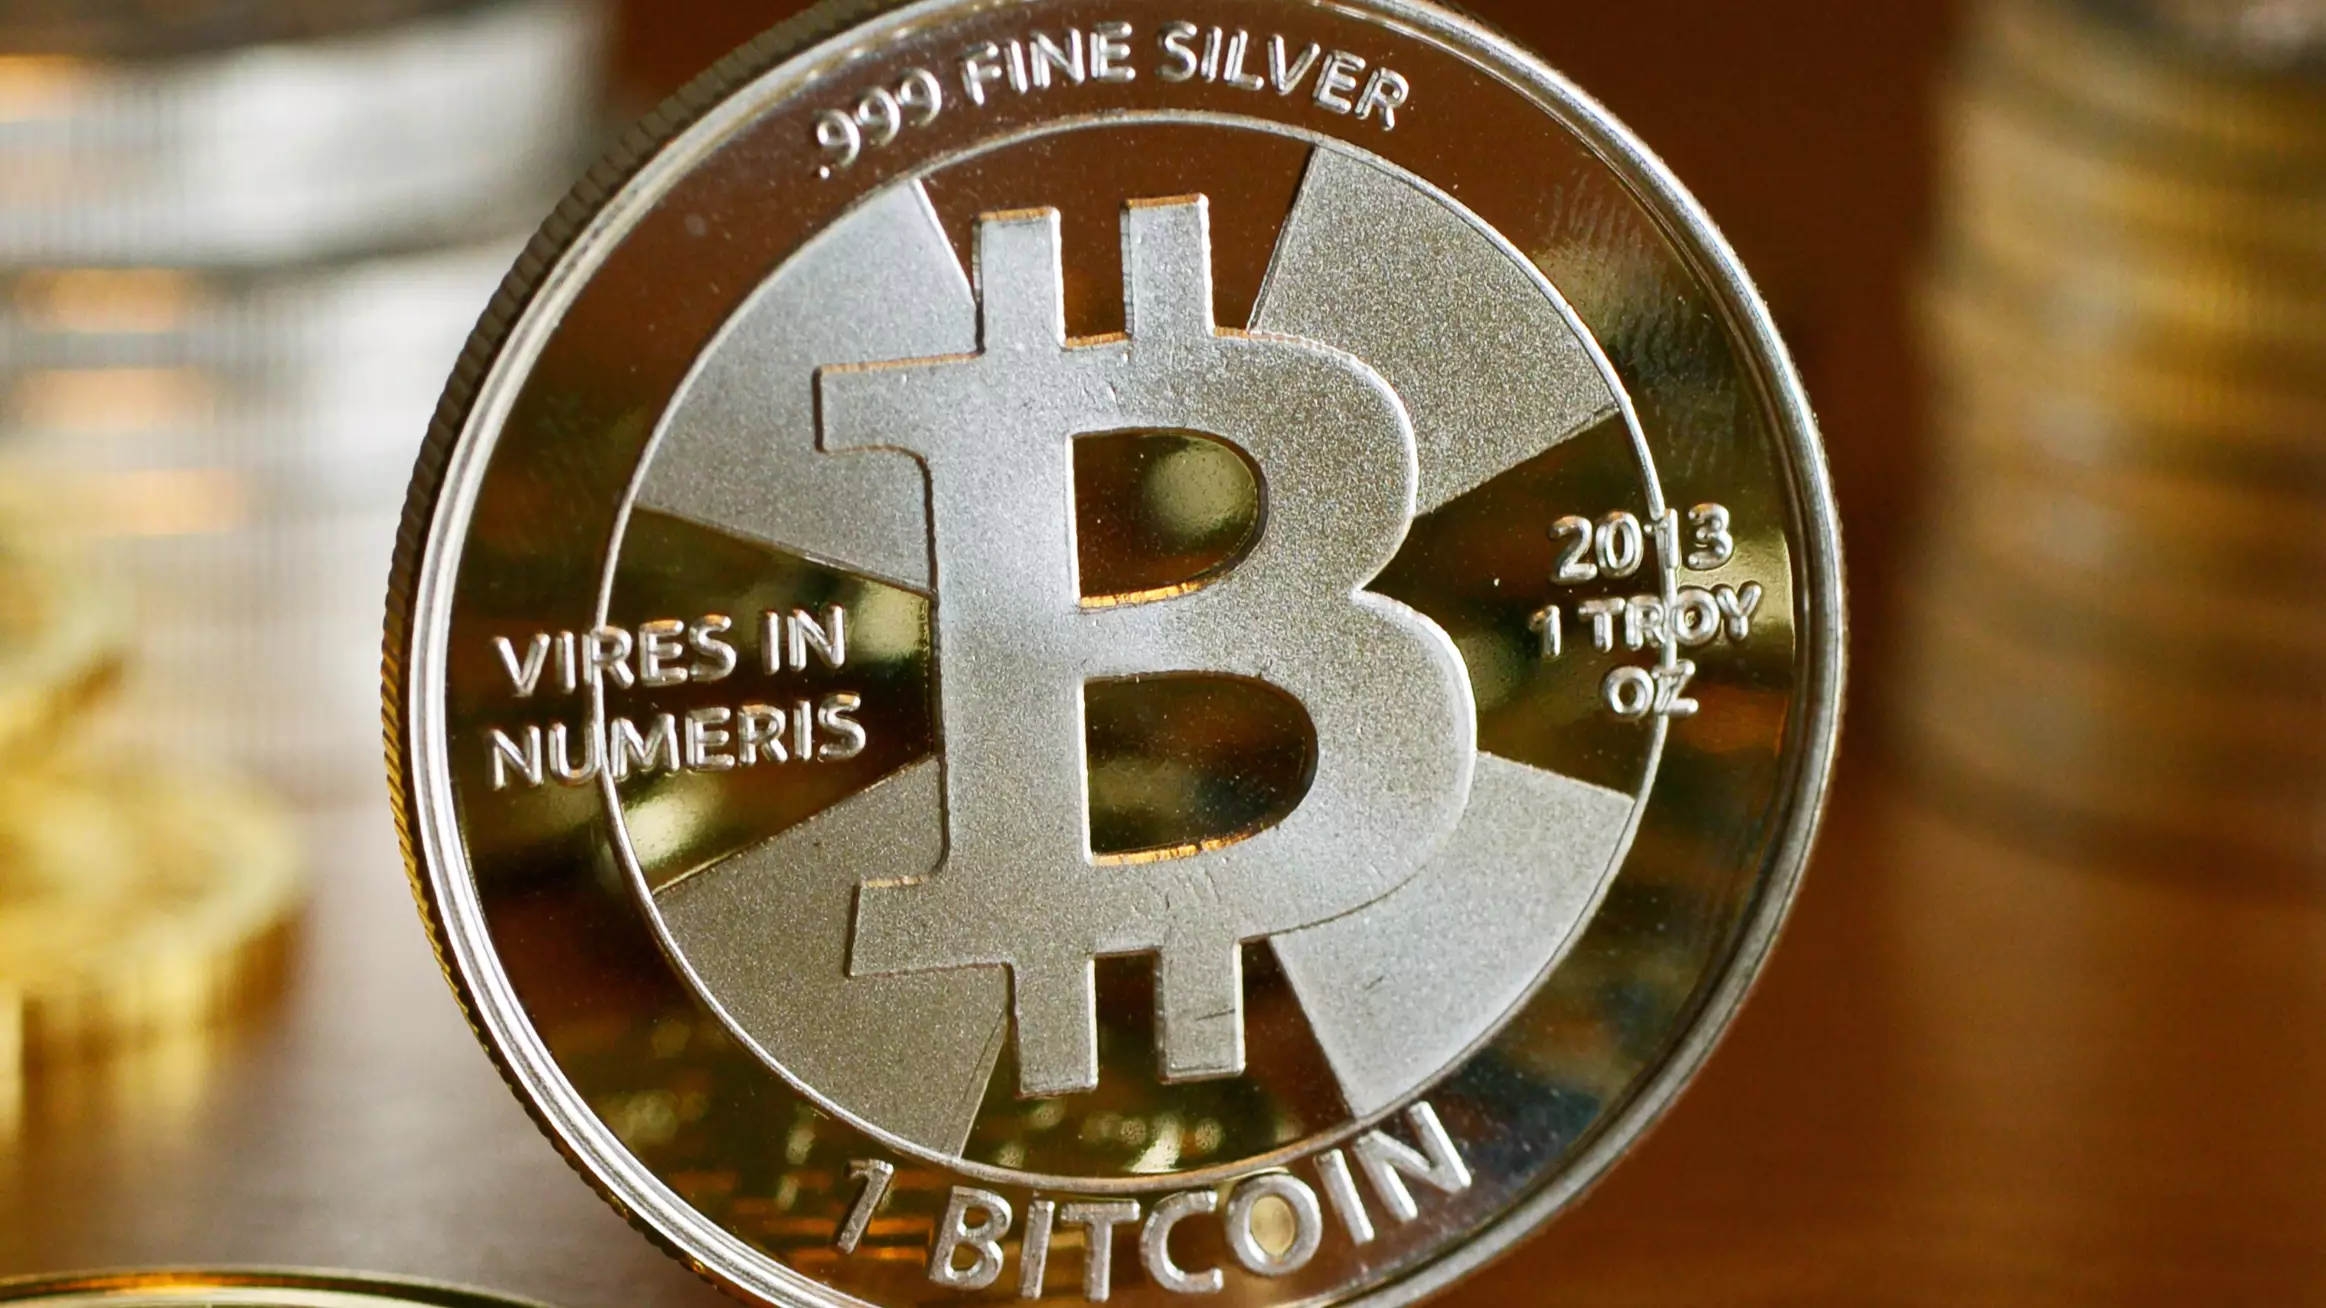 Man Sells Everything His Family Owns To Buy Bitcoin